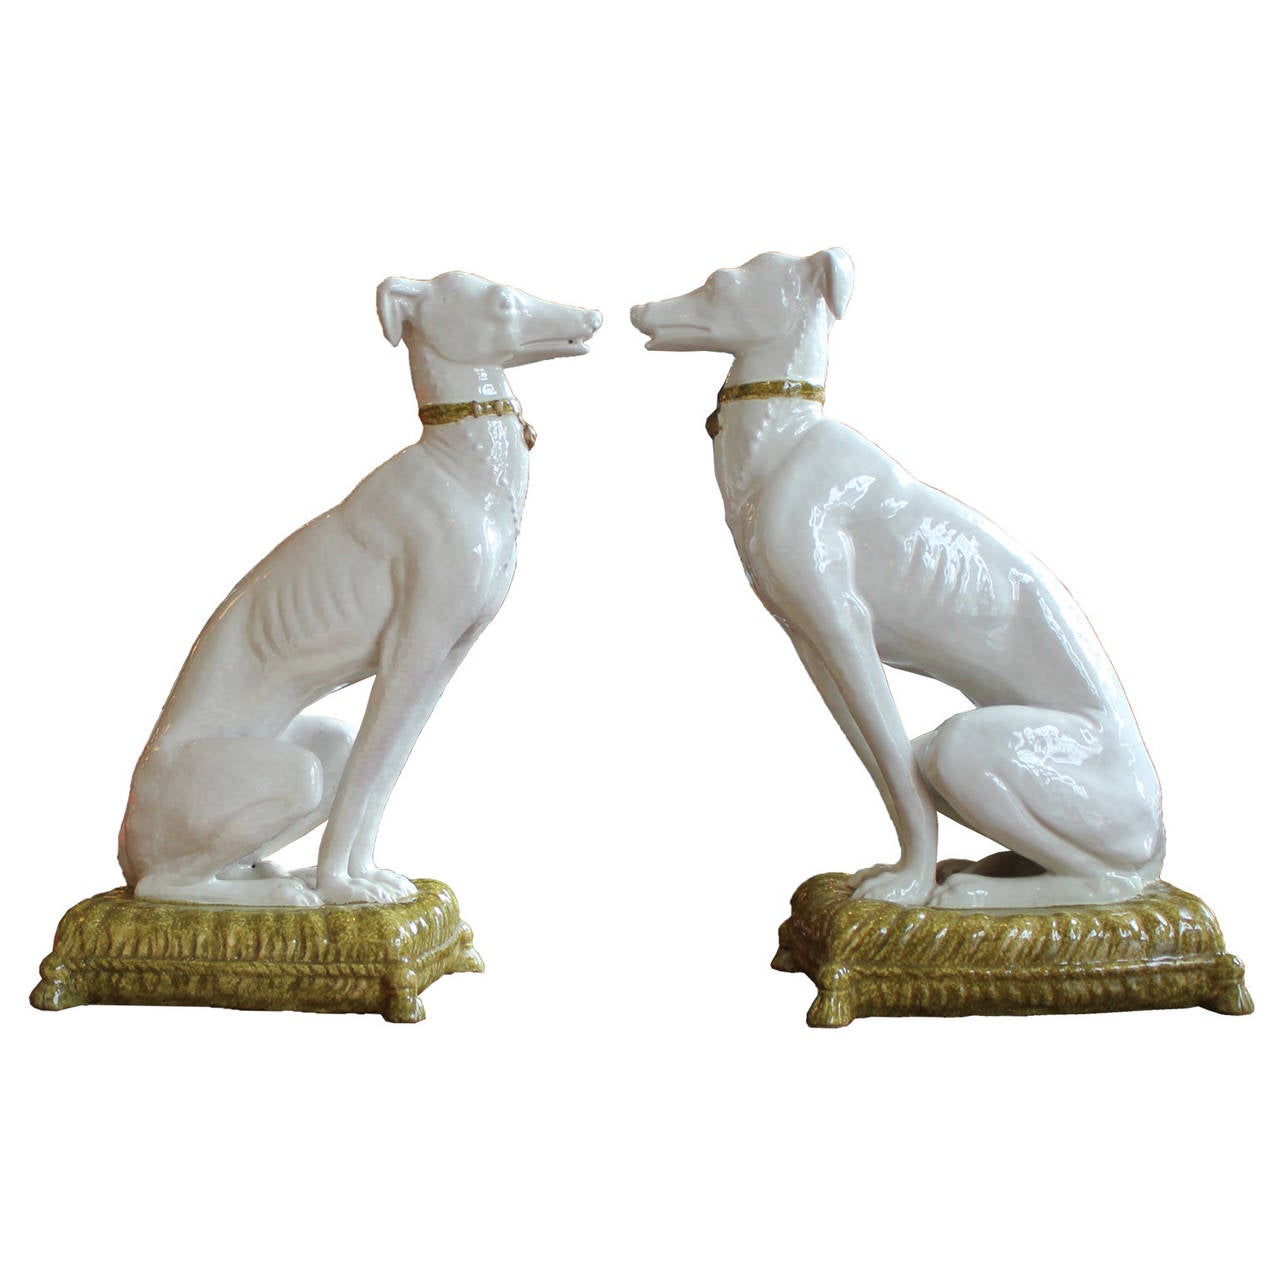 Great Pair of Italian Greyhound Sculptures. Signed CB. In excellent condition. Circa 1950s. Great accessory to any room.